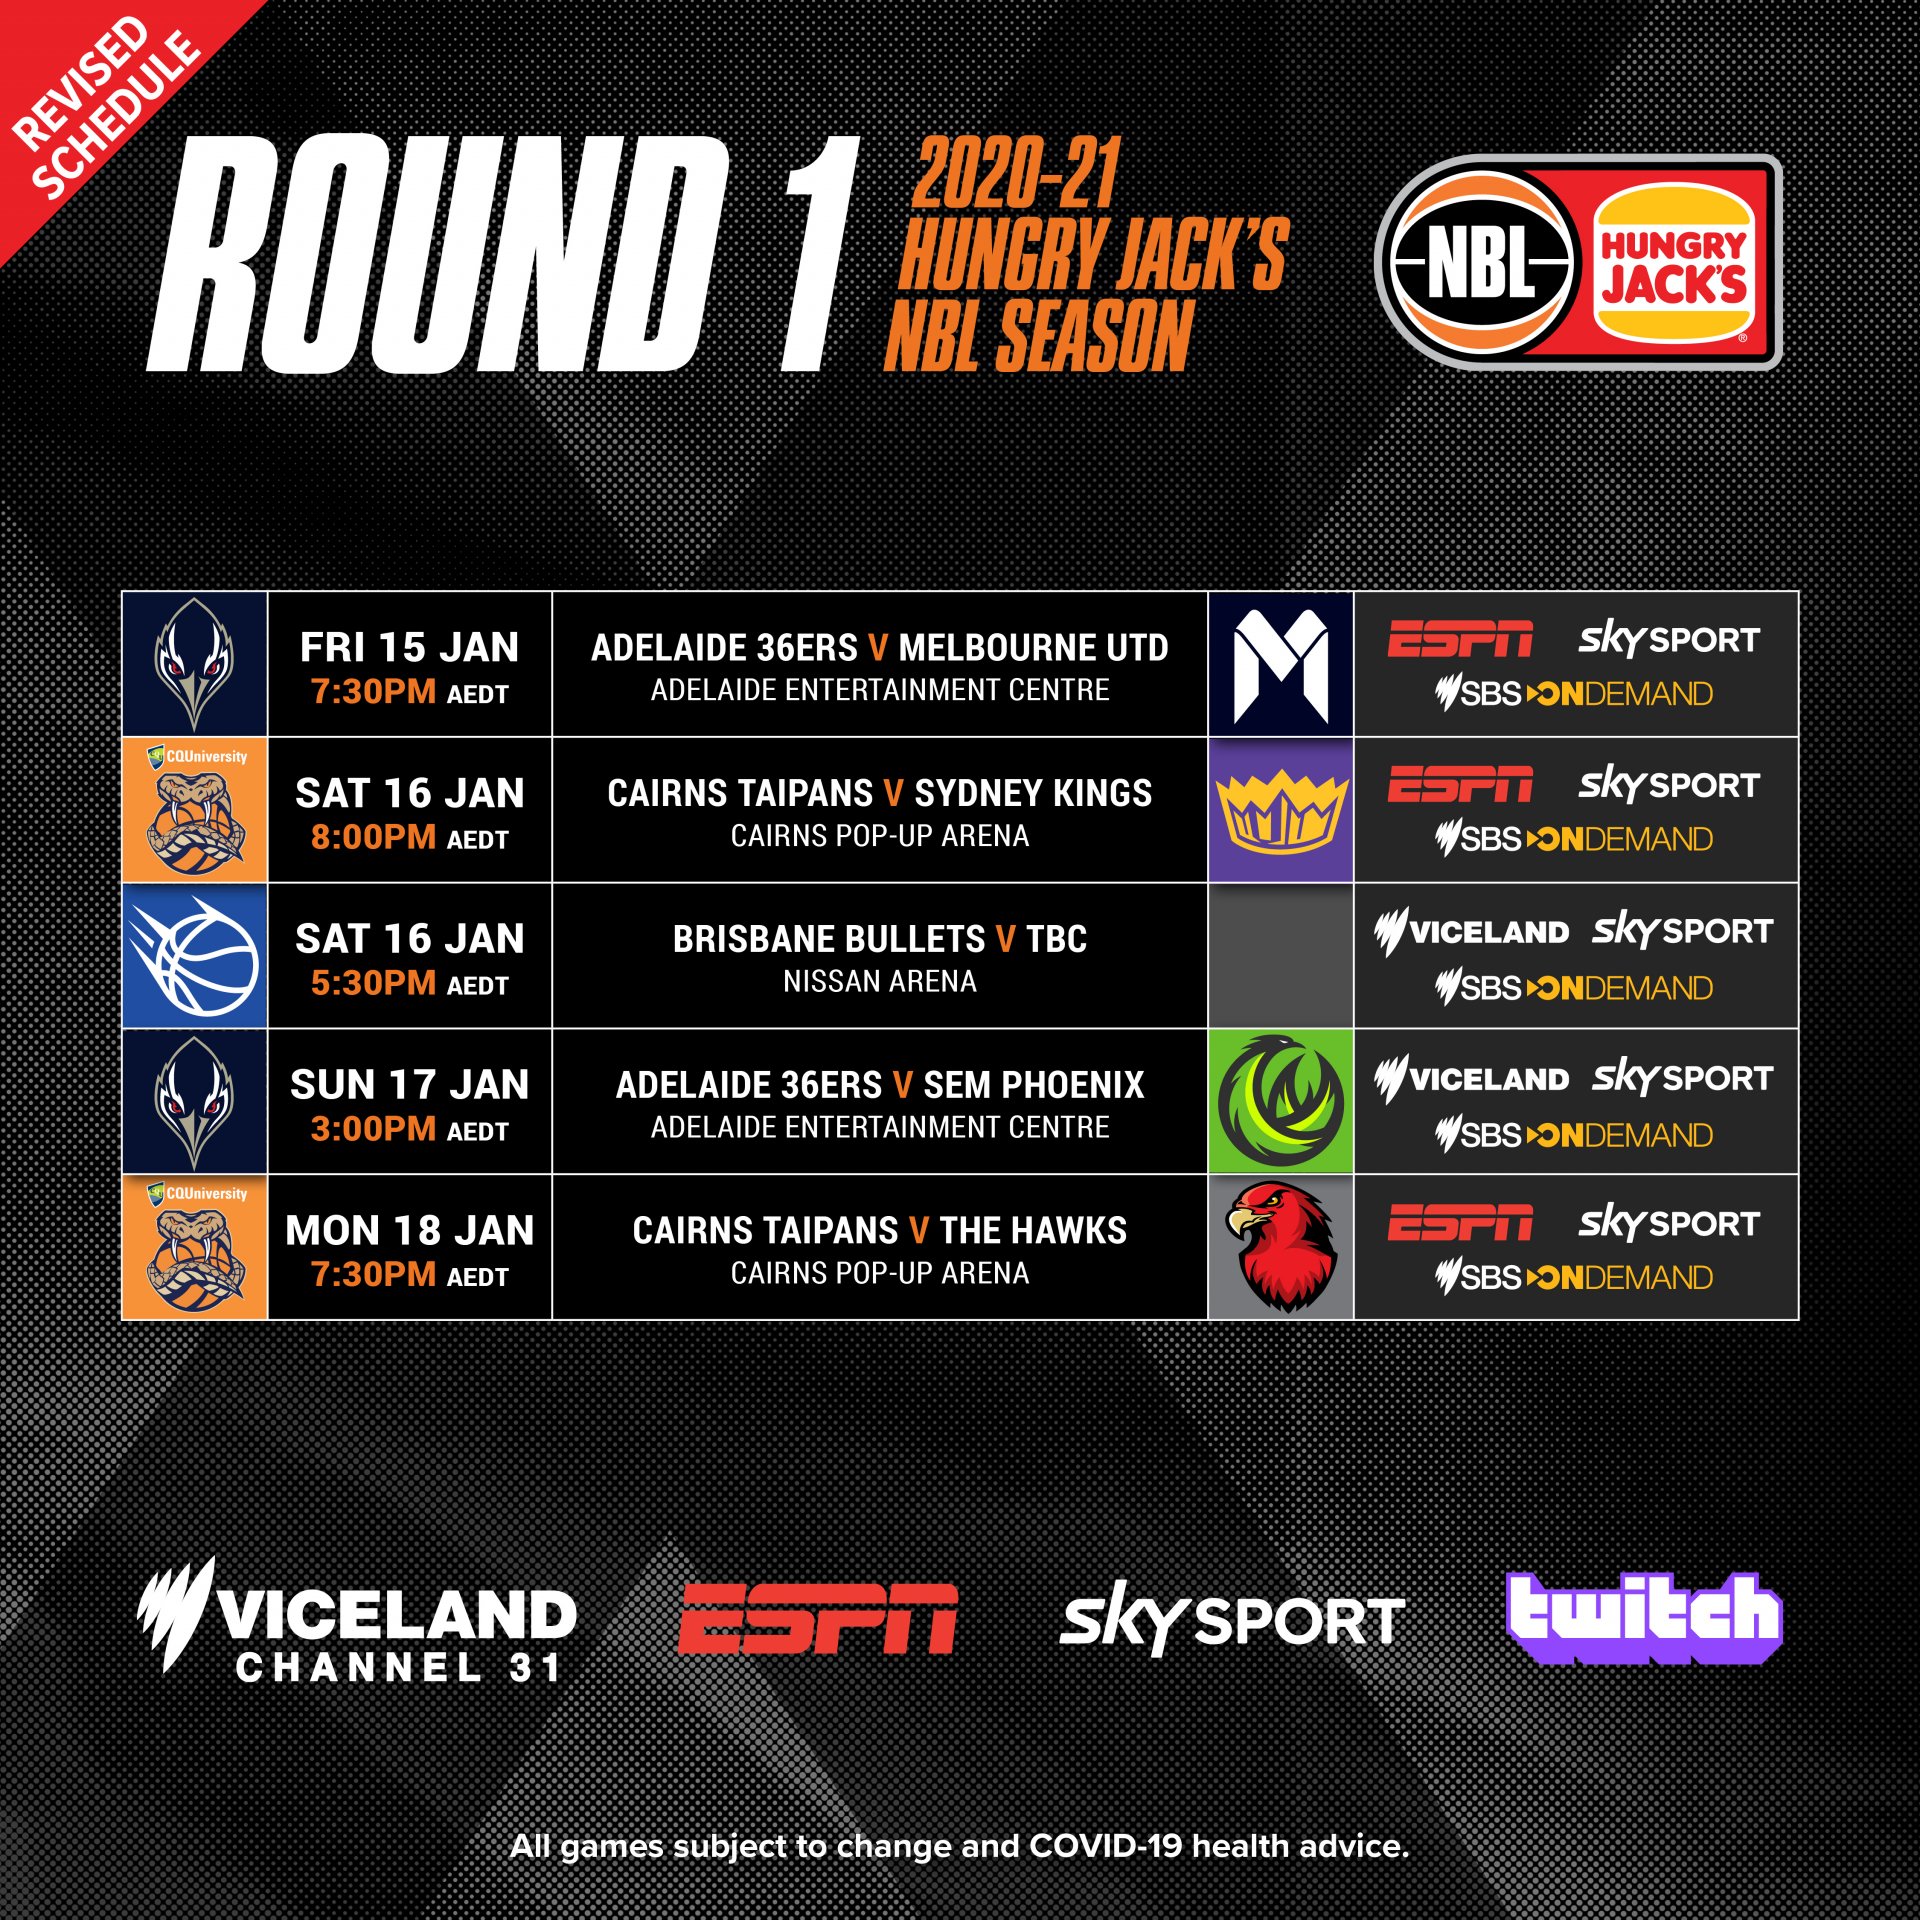 Revised Schedule For Opening Round Of Hungry Jacks NBL Season